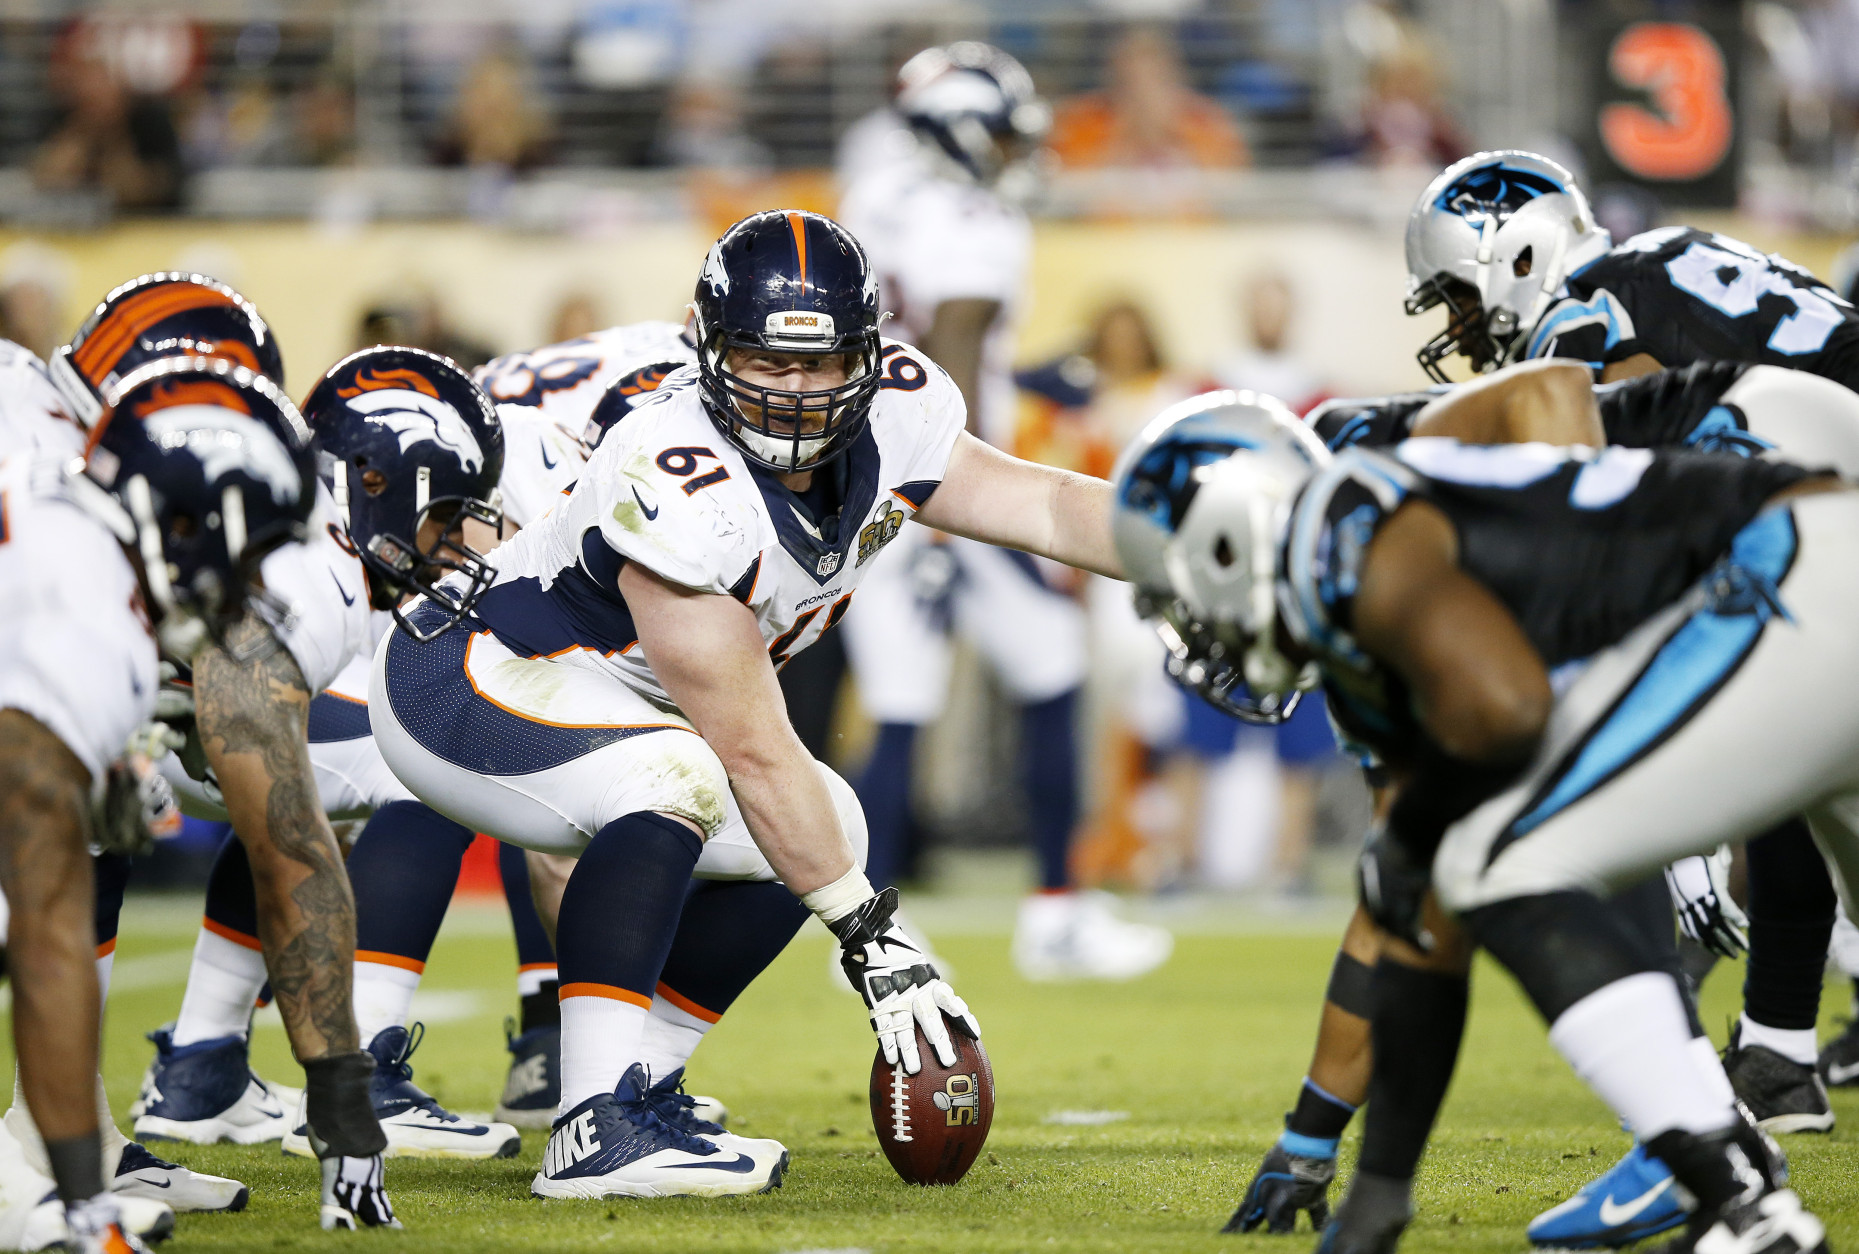 SANTA CLARA, CA - FEBRUARY 07:   Matt Paradis #61 of the Denver Broncos prepares to hike the ball against the Carolina Panthers in the fourth quarter during Super Bowl 50 at Levi's Stadium on February 7, 2016 in Santa Clara, California.  (Photo by Ezra Shaw/Getty Images)